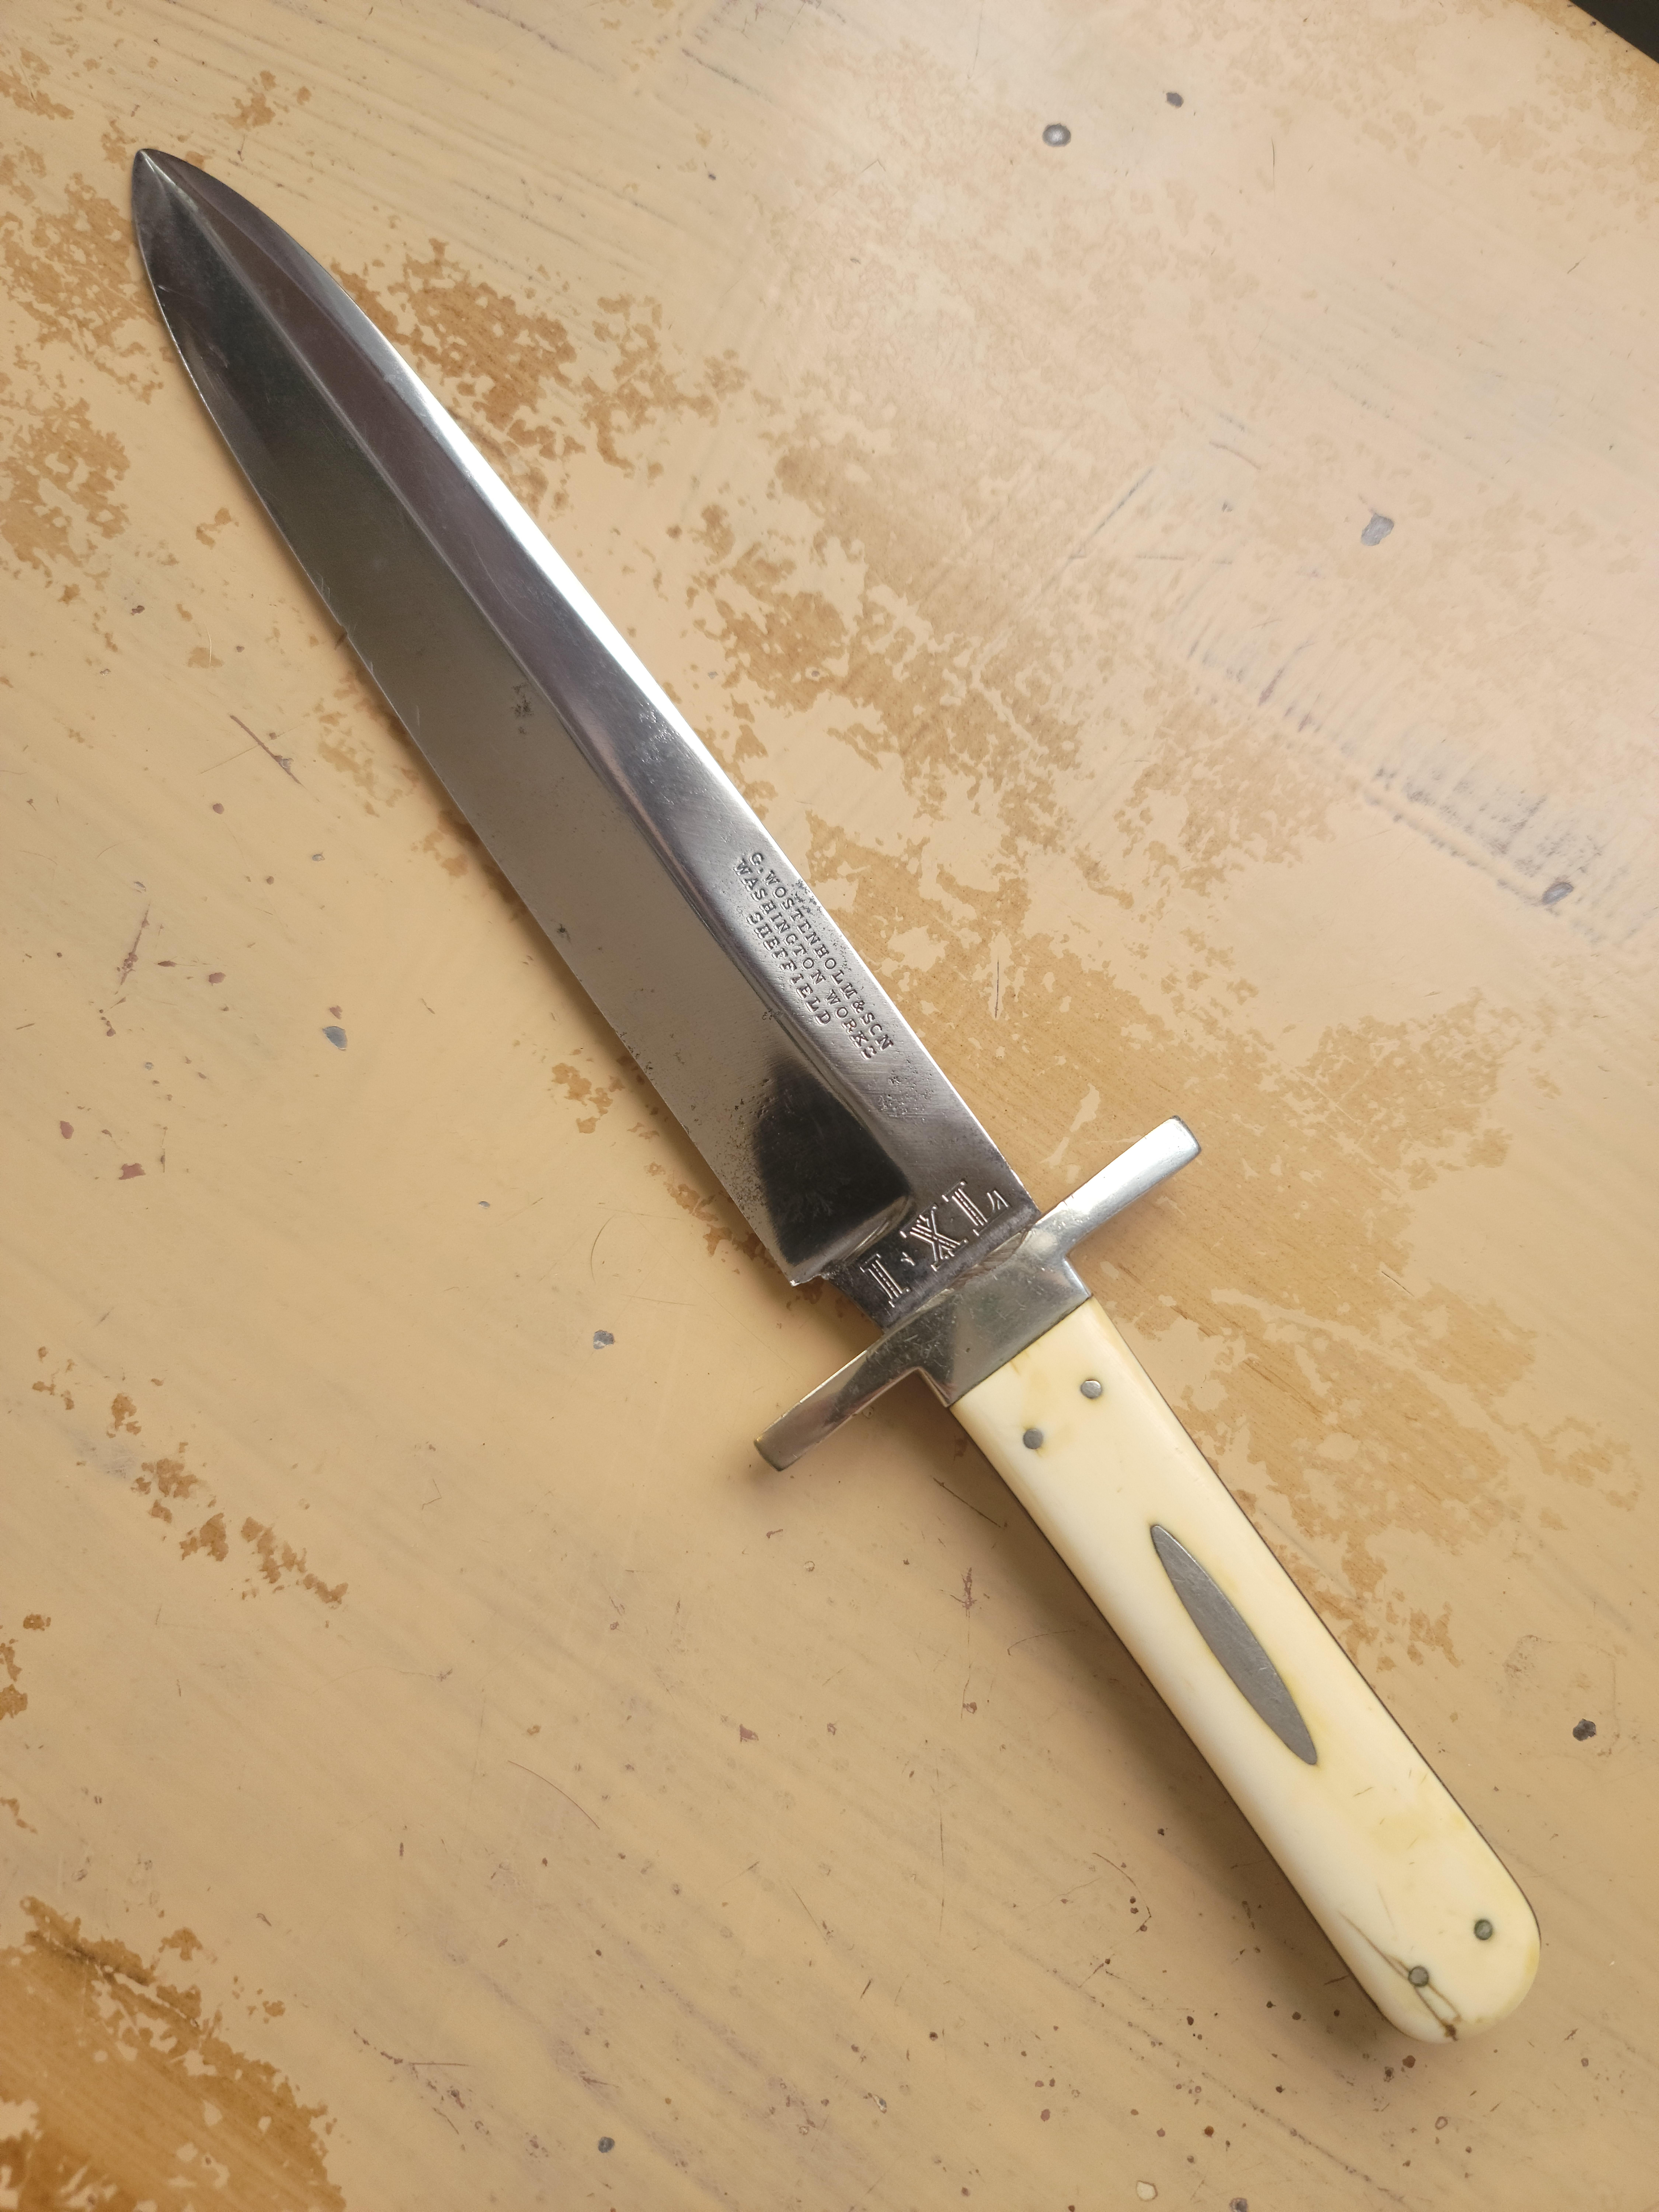 I have this old Wostenholm bowie. Who makes a similar modern reproduction?